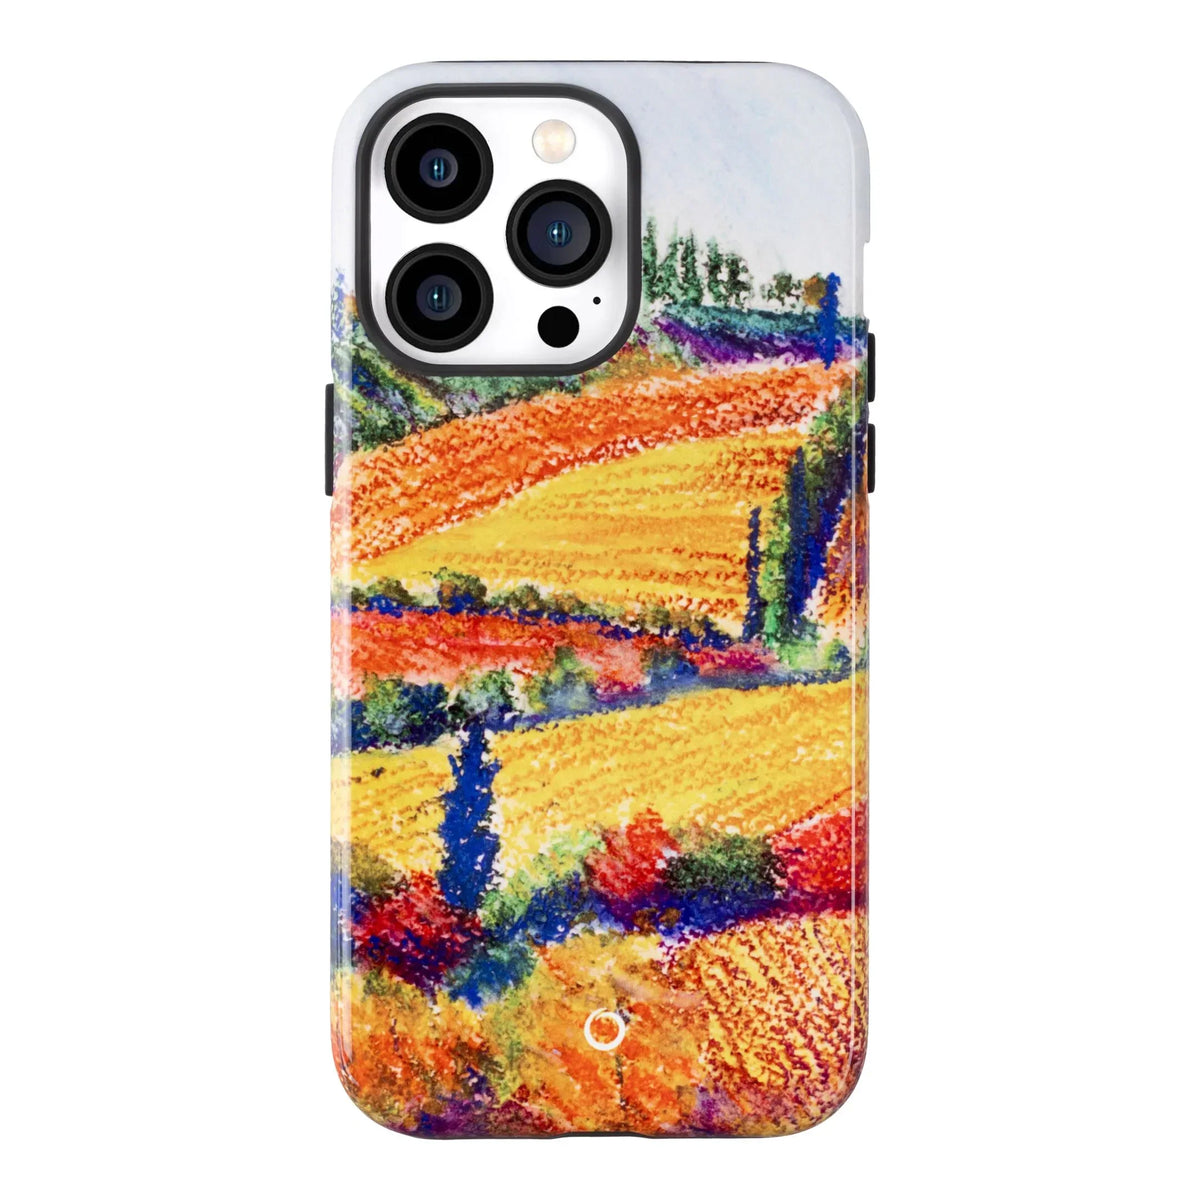 Amber Fields iPhone Case - iPhone 11 Pro